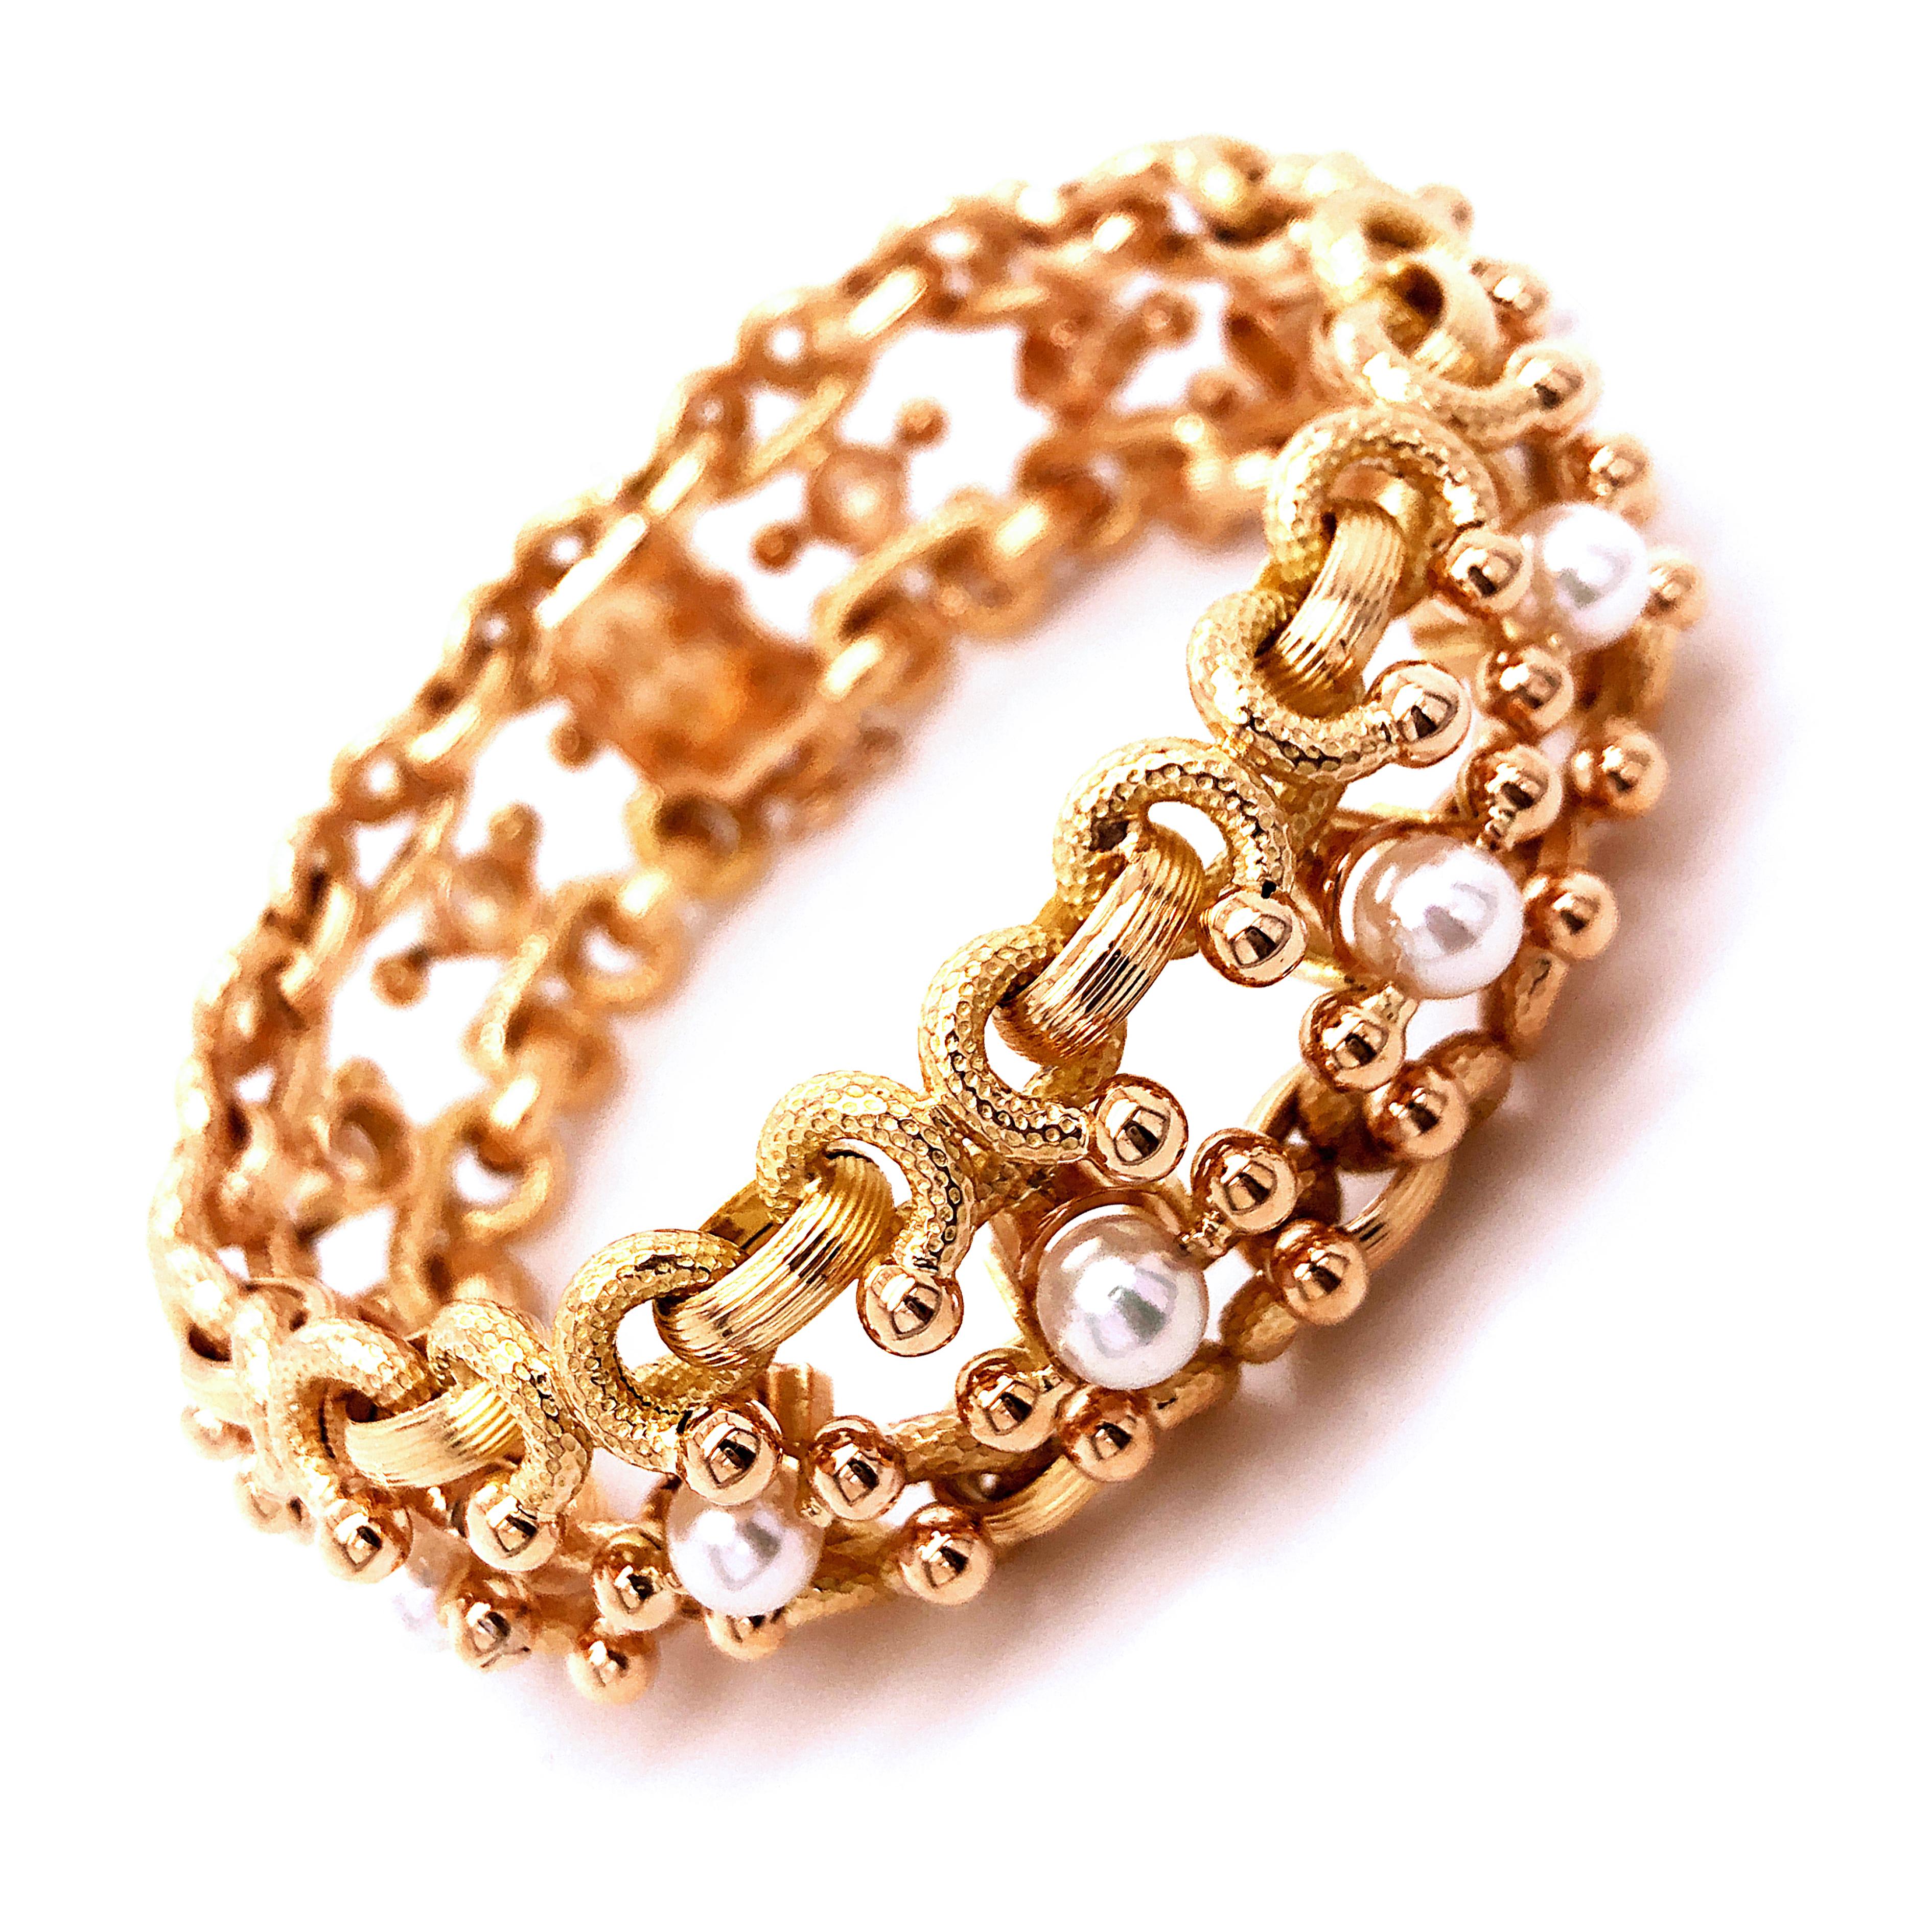 One-of-a-kind, Original 1960, absolutely Chic yet Timeless Japanese Akoya Pearl Yellow Gold Handcrafted Setting Bracelet(7.55inches, 19.2cm Lenght, 0.9inches, 23mm Height), 61.6g, 1.98Troy Ounces Weight.
This piece is a beautiful example of italian